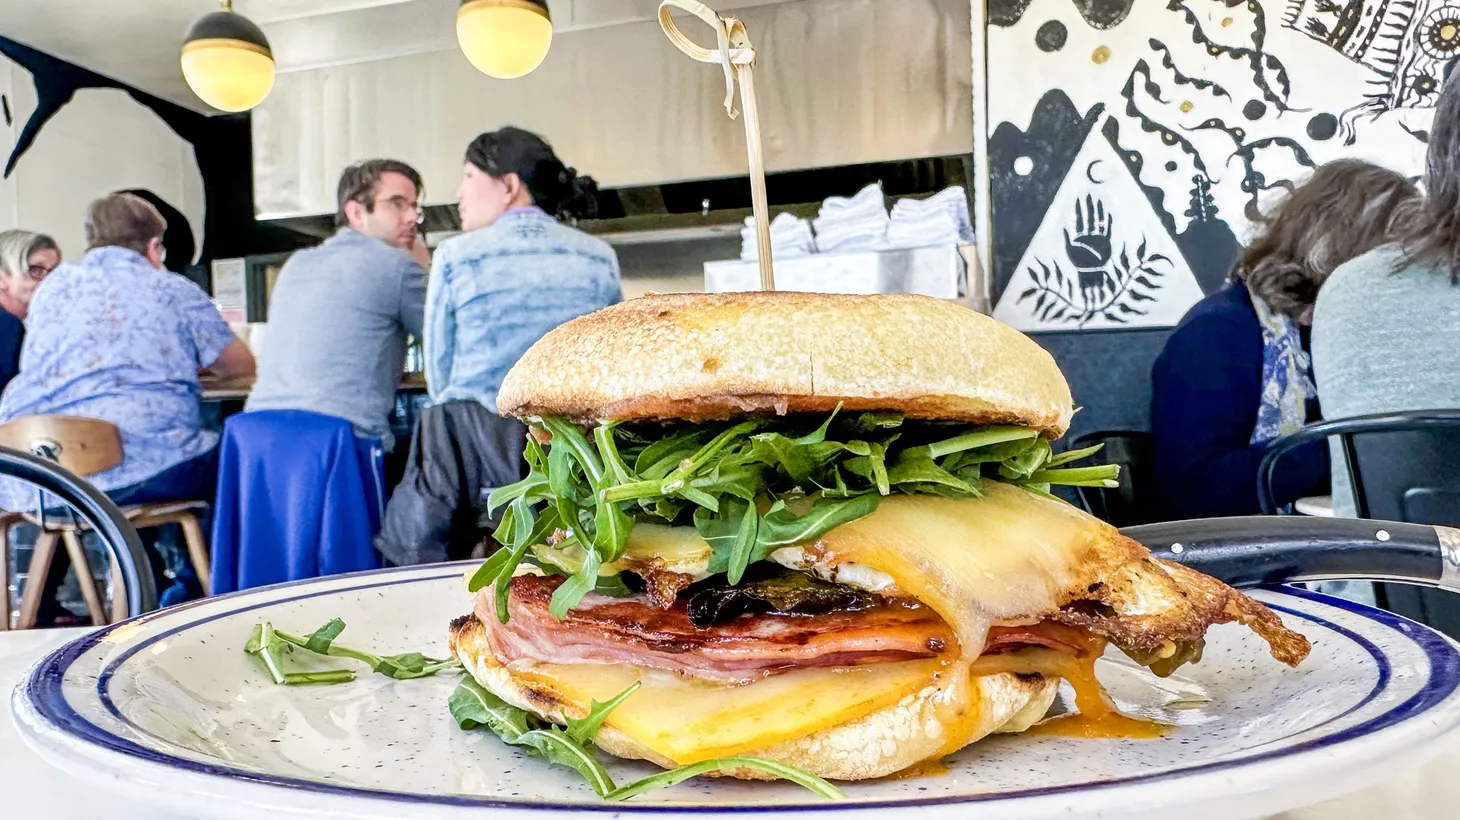 Griddled ham makes friends with a fried egg, muenster cheese, smoked shishito peppers, date jam and arugula in La Copine’s breakfast sandwich.